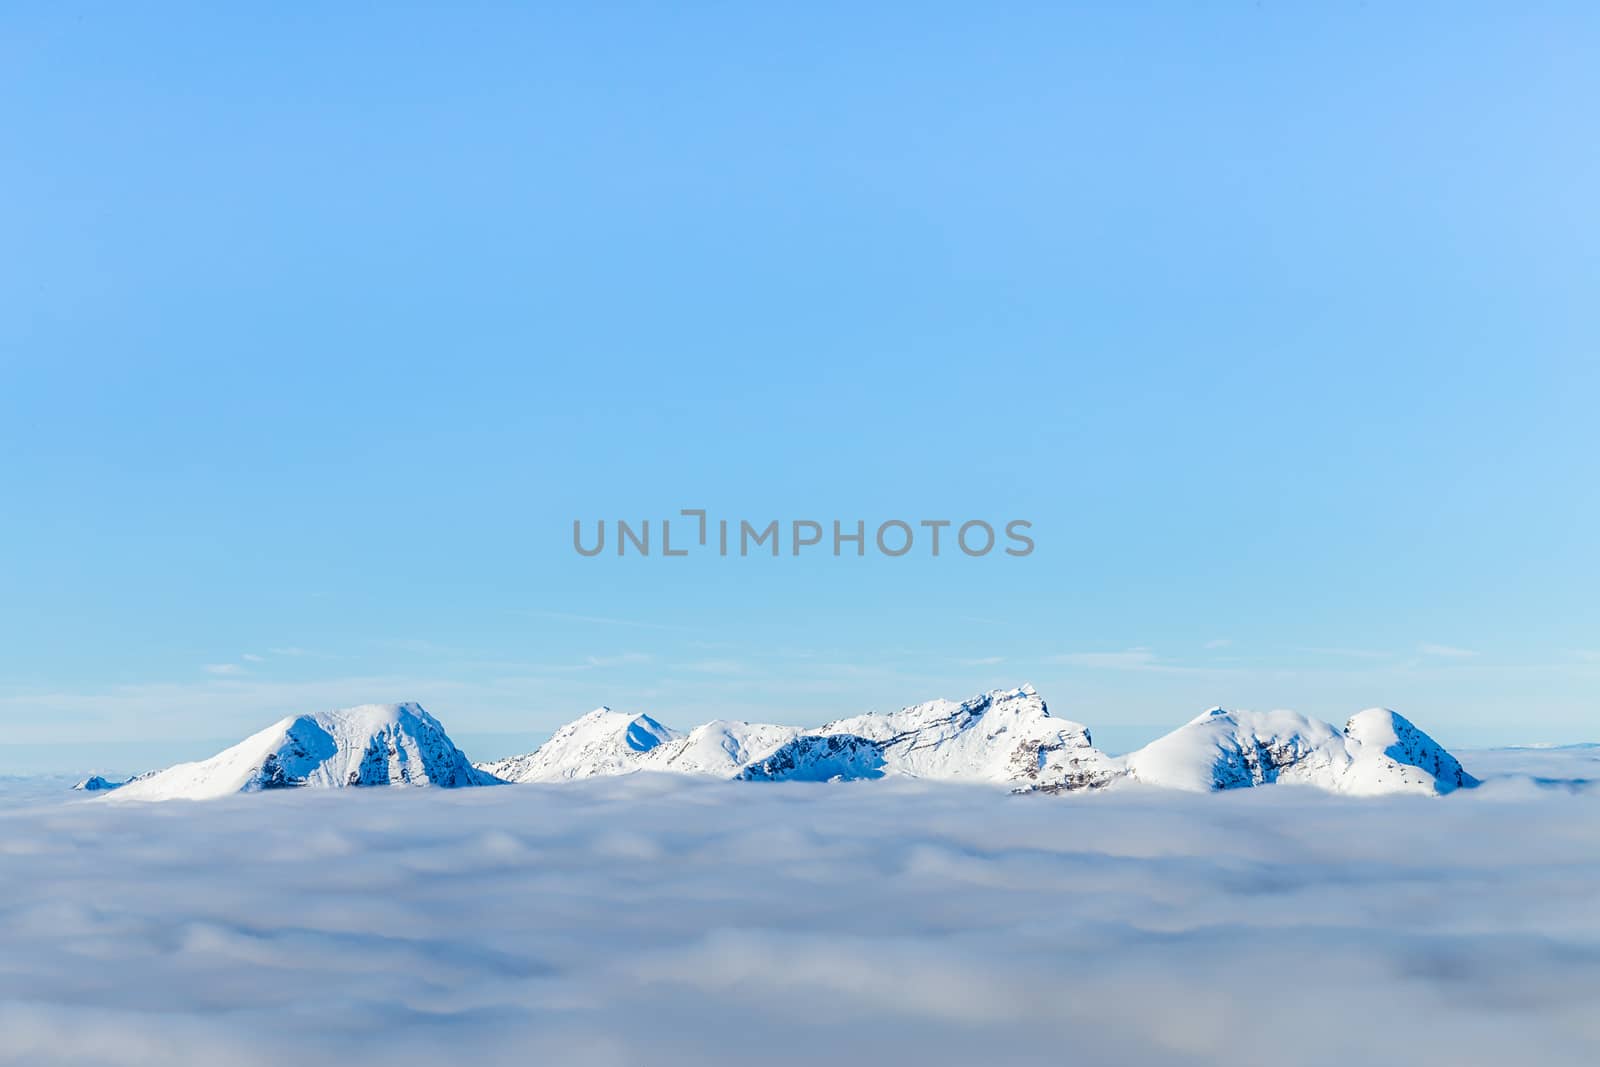 Snowy mountains and clouds by kenzo85